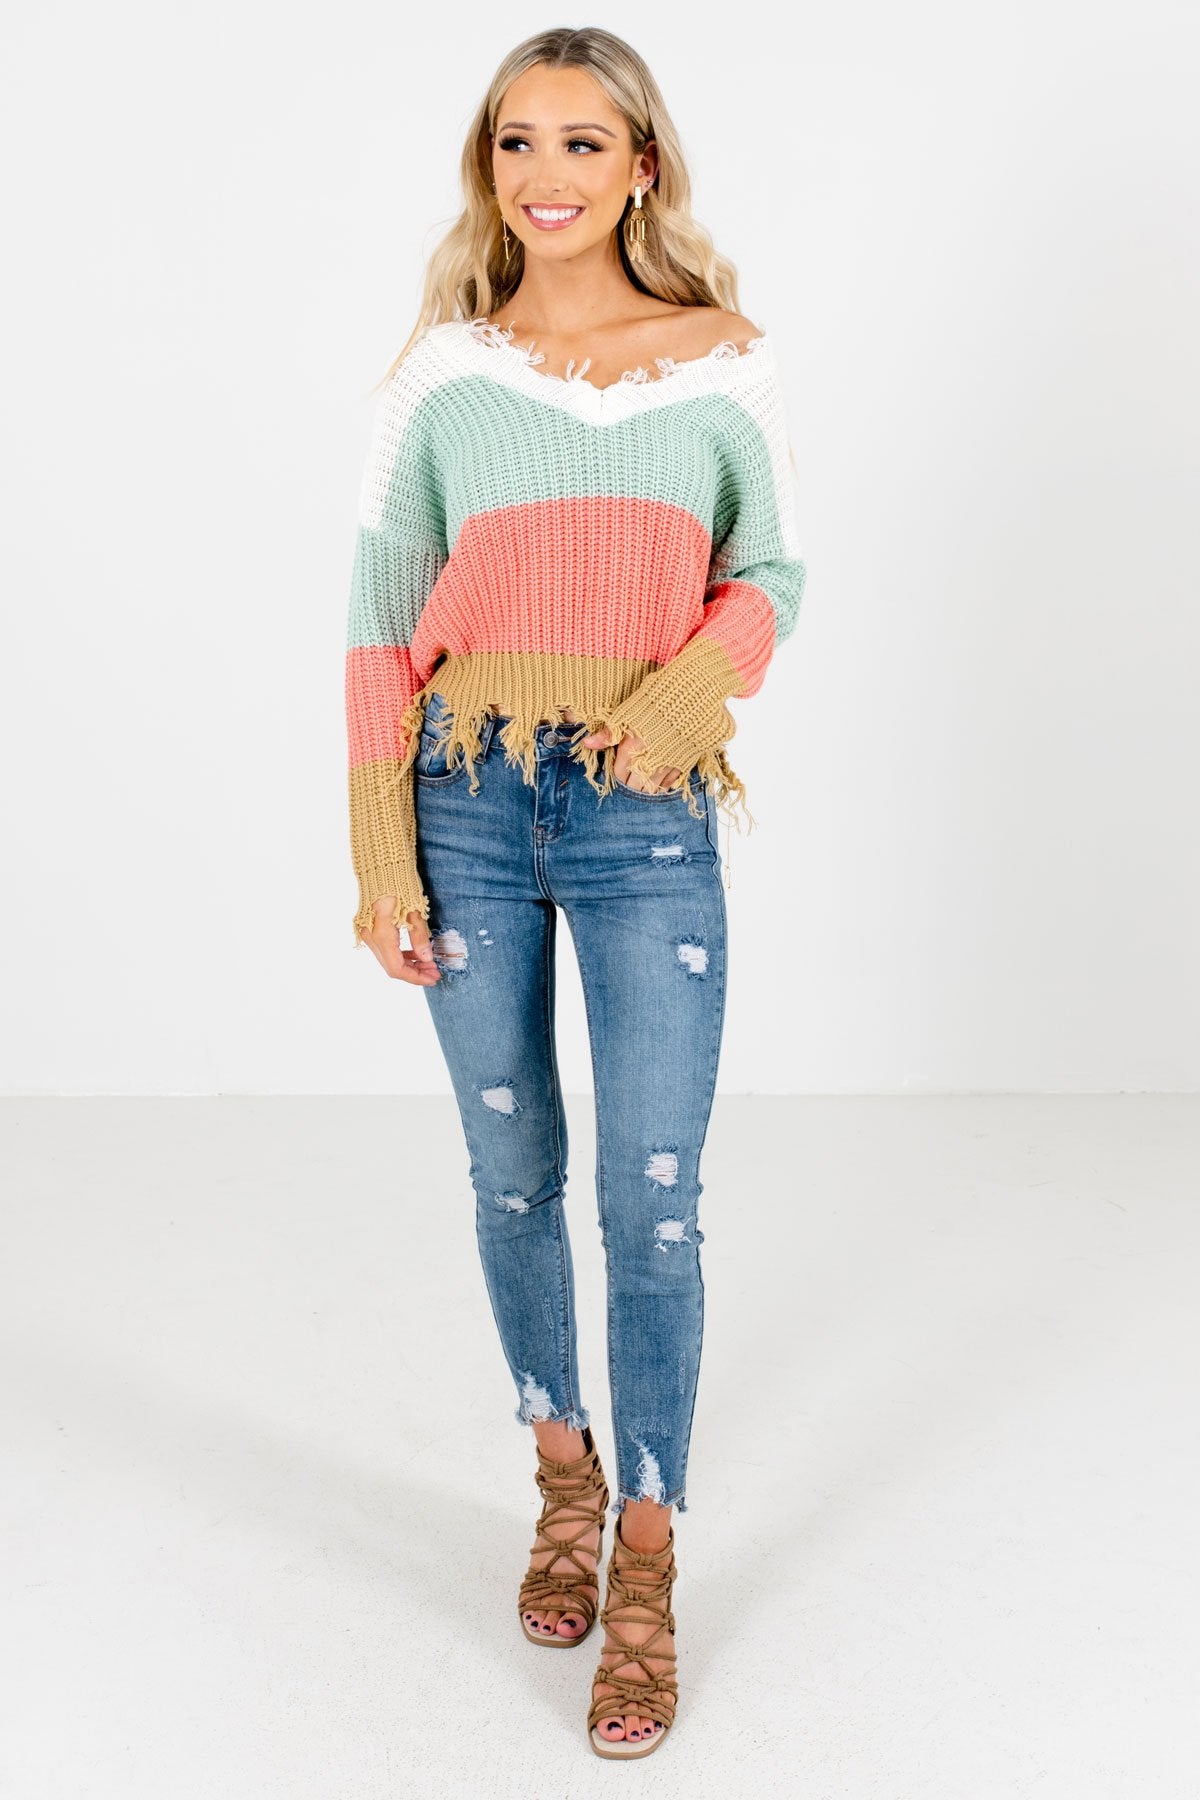 Mint Green Affordable Online Boutique Clothing for Women